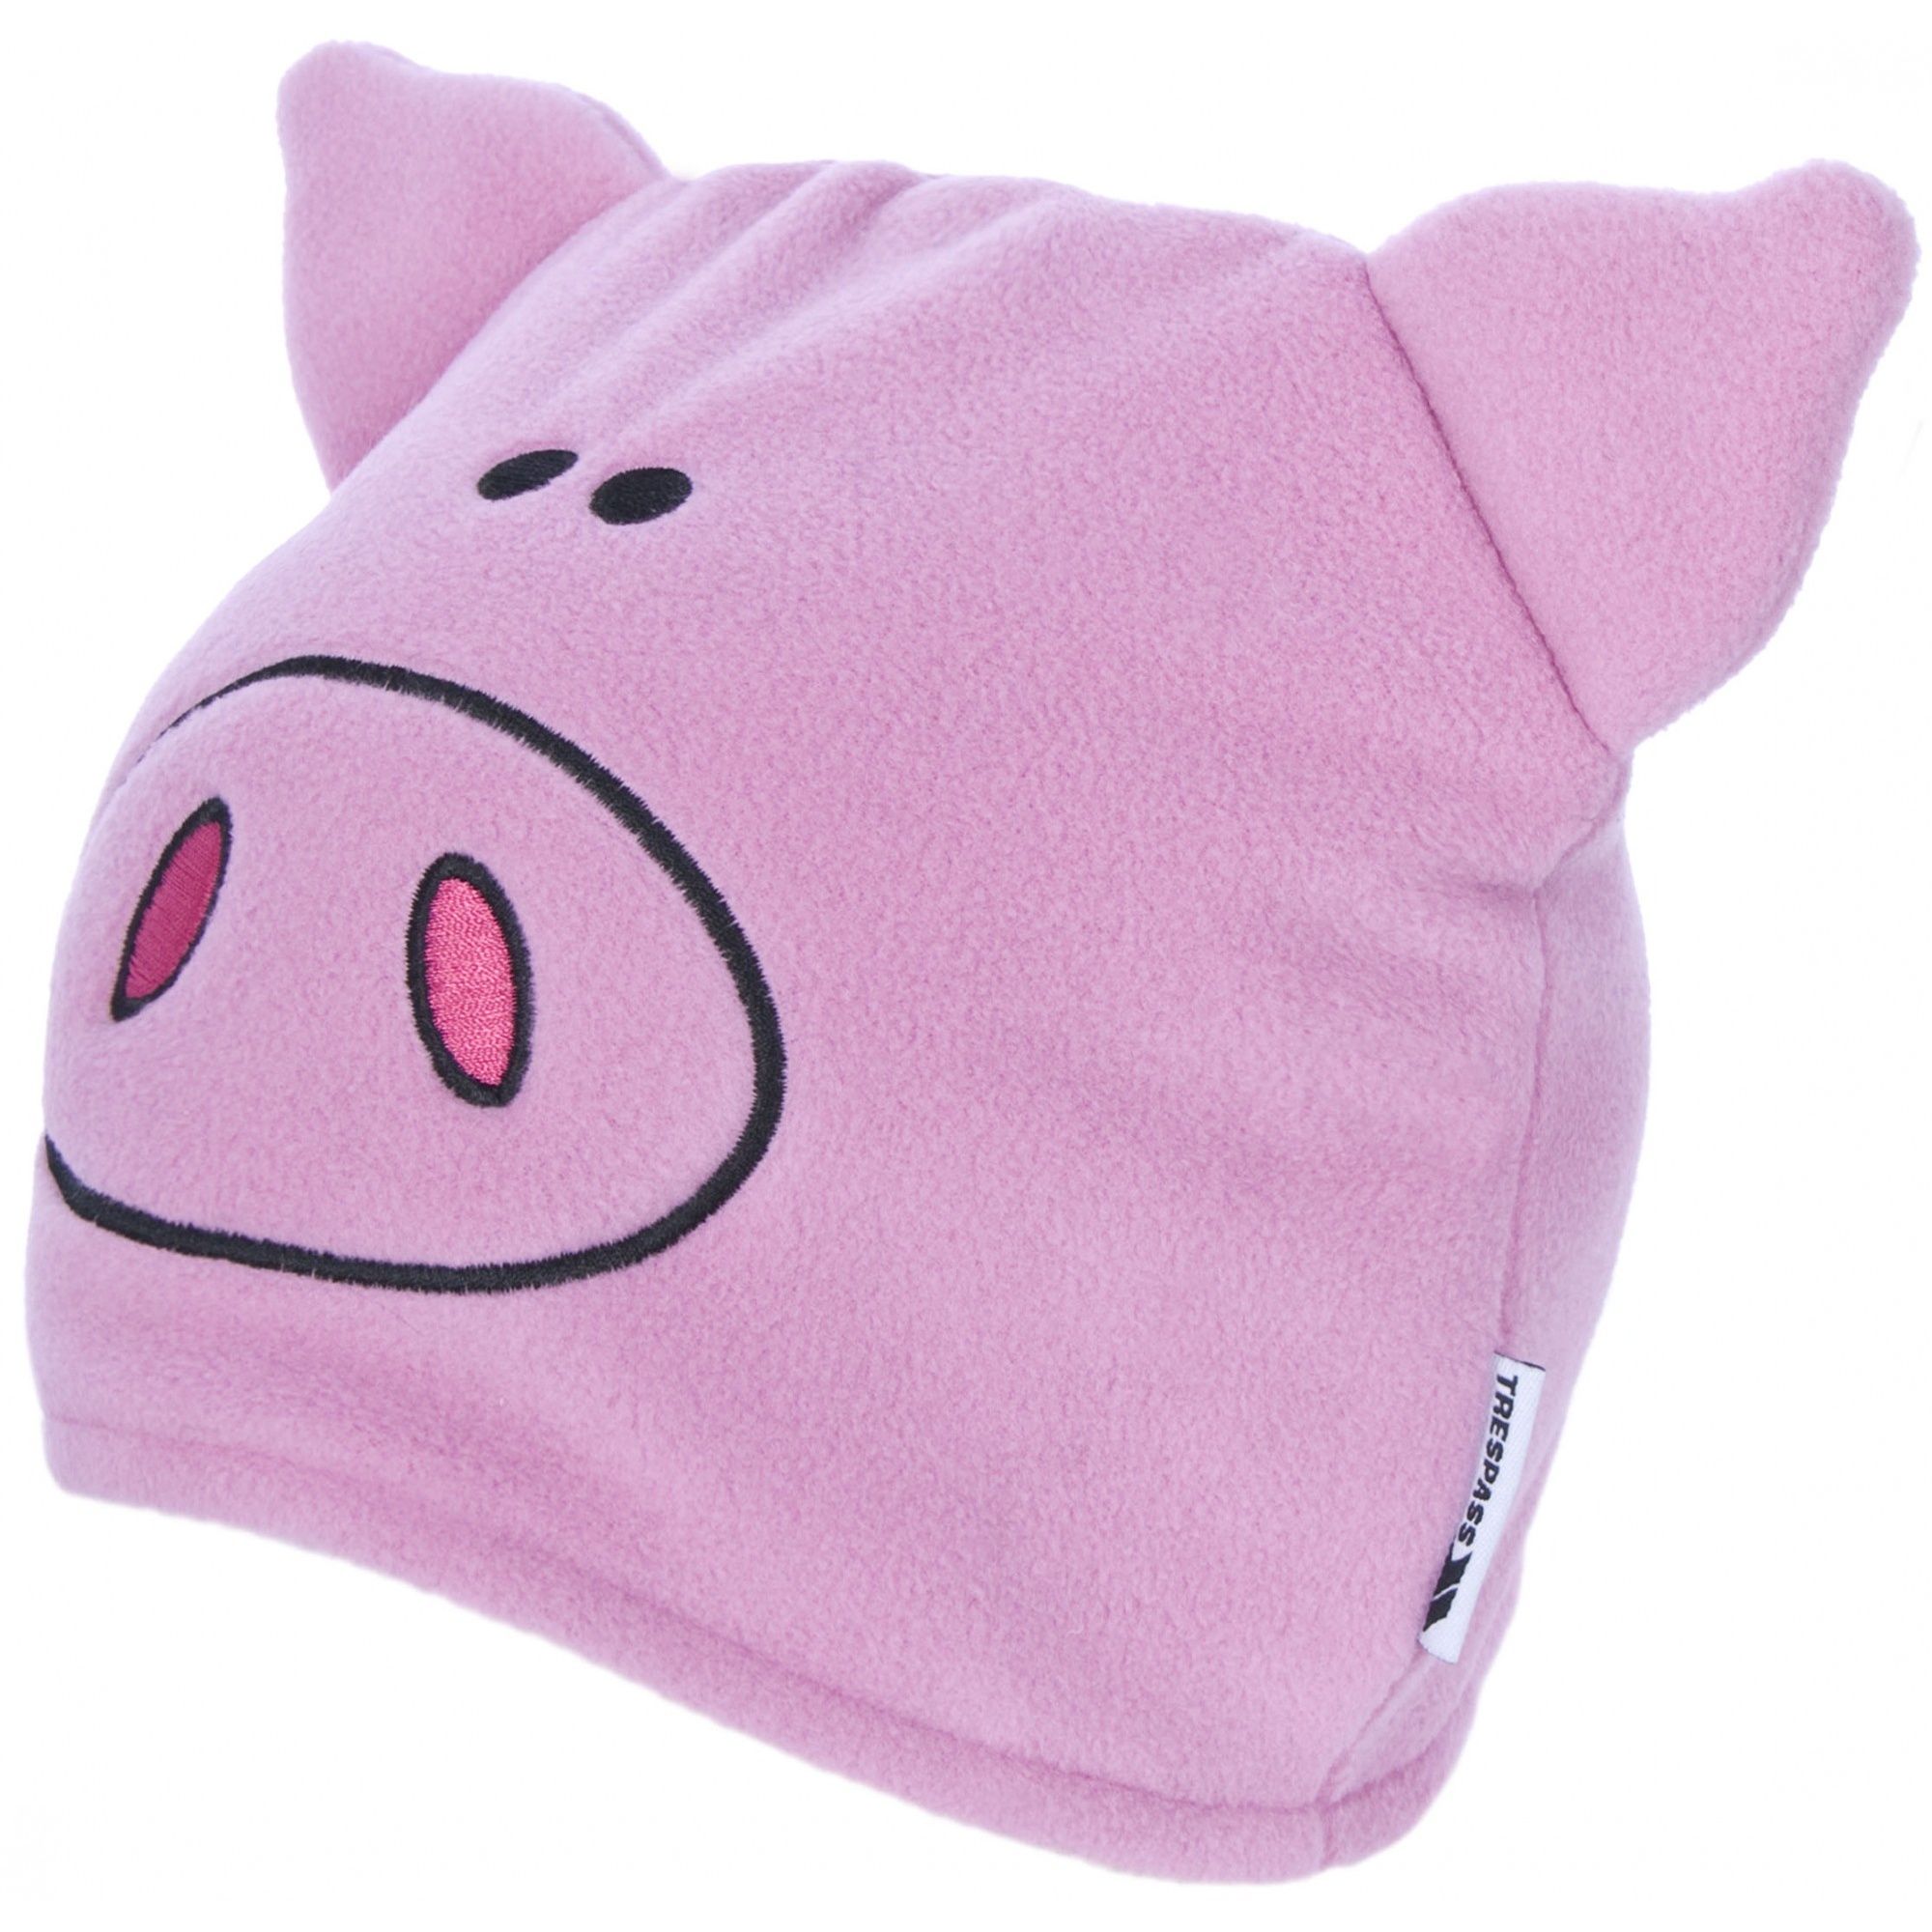 Kids Novelty Beanie Hat. Woven Label. Outer: 100% Polyester Anti-Pil Fleece.